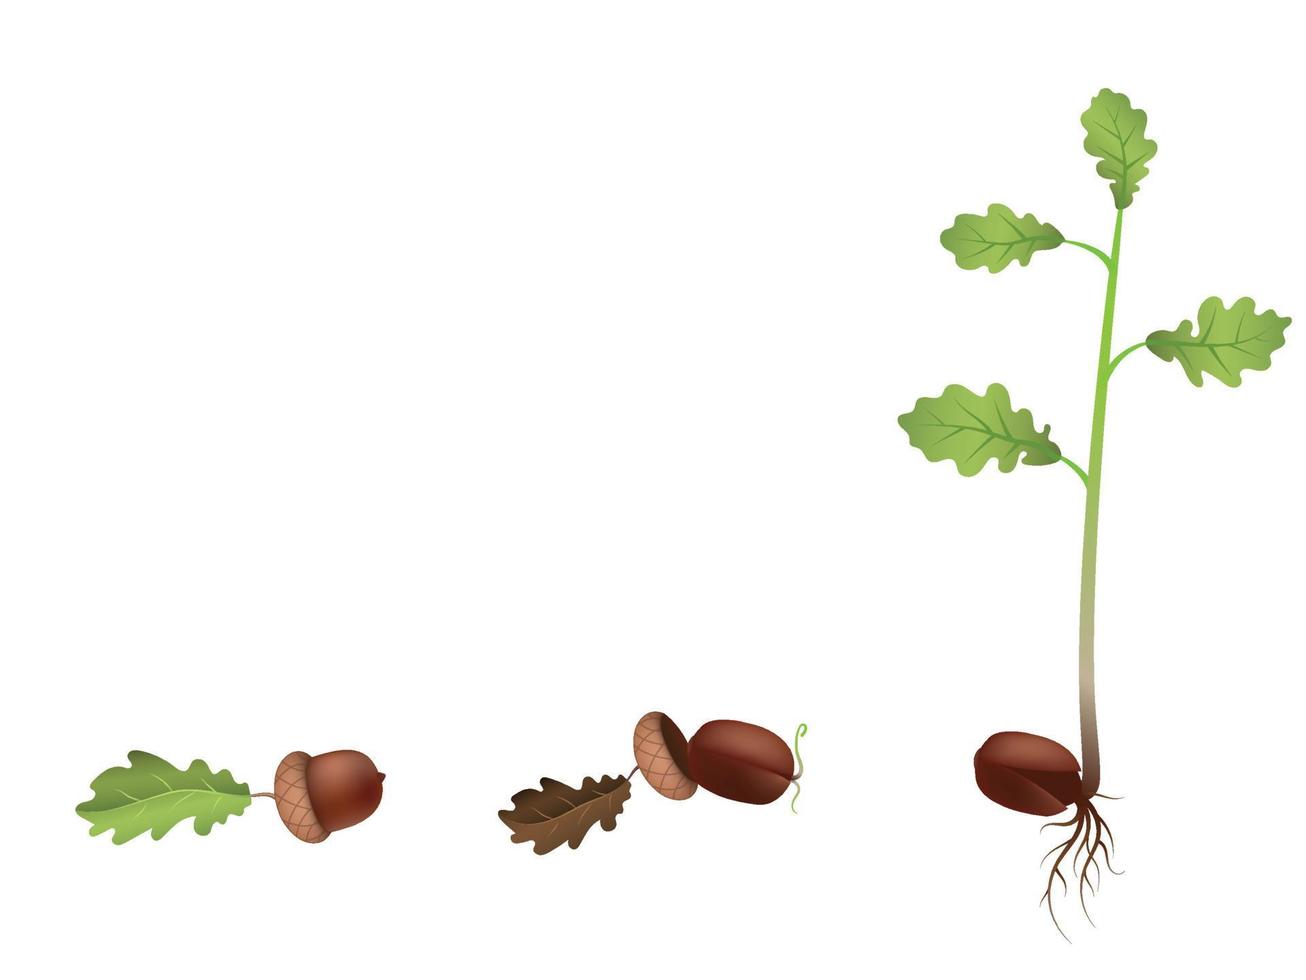 Stage growth of a tree set. Concept Life cycle of a oak tree. Vector illustration of sprouted acorn seed to plant with leaf, diagram of growing tree.